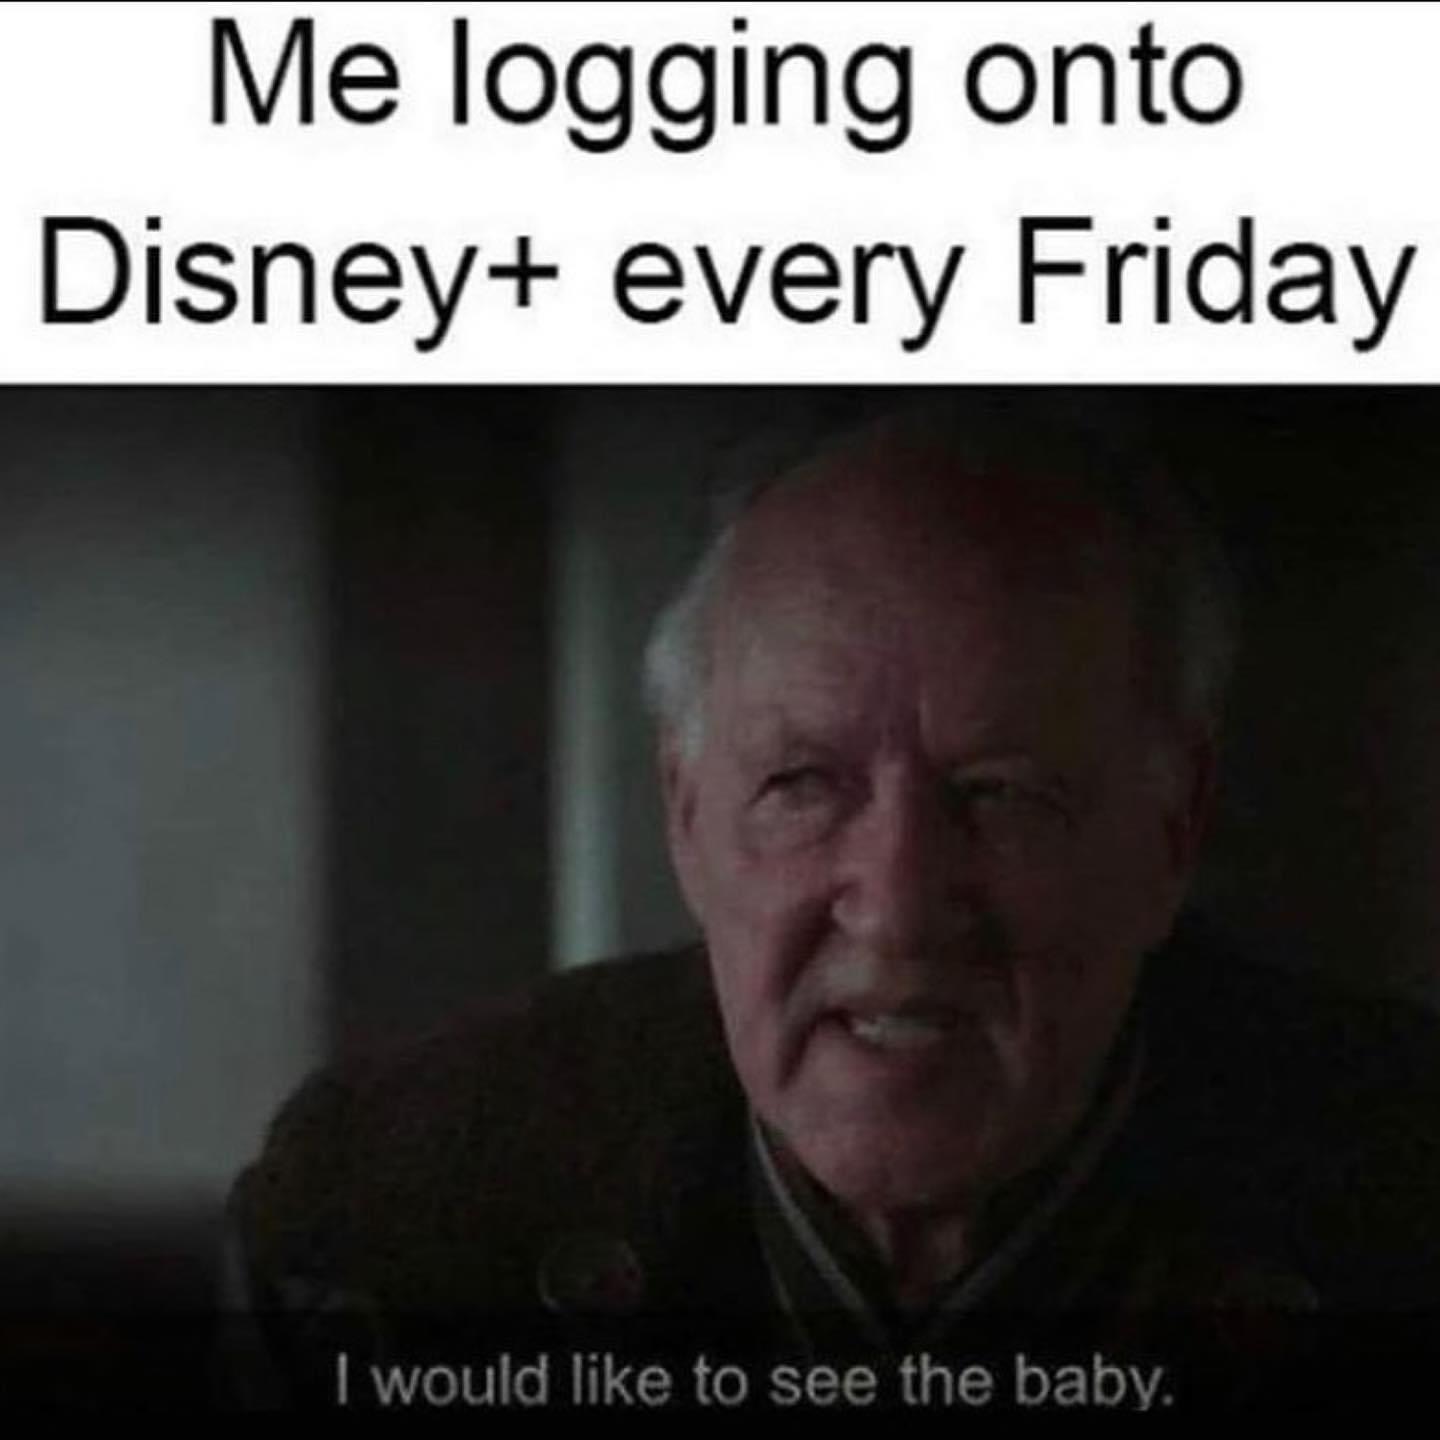 person - Me logging onto Disney every Friday I would to see the baby.